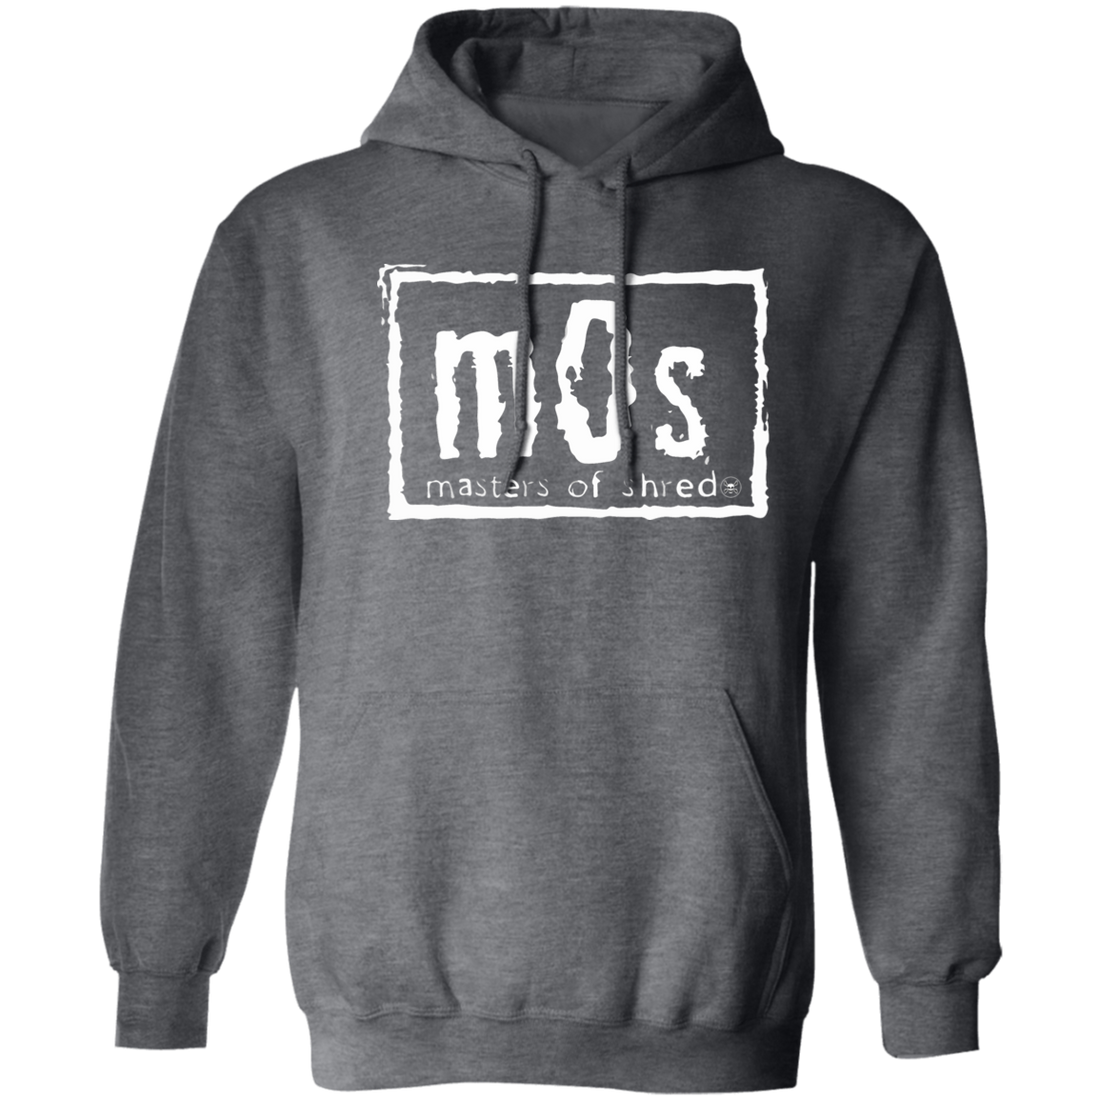 MOS 4 LIFE Hoodies! CLOSEOUT!